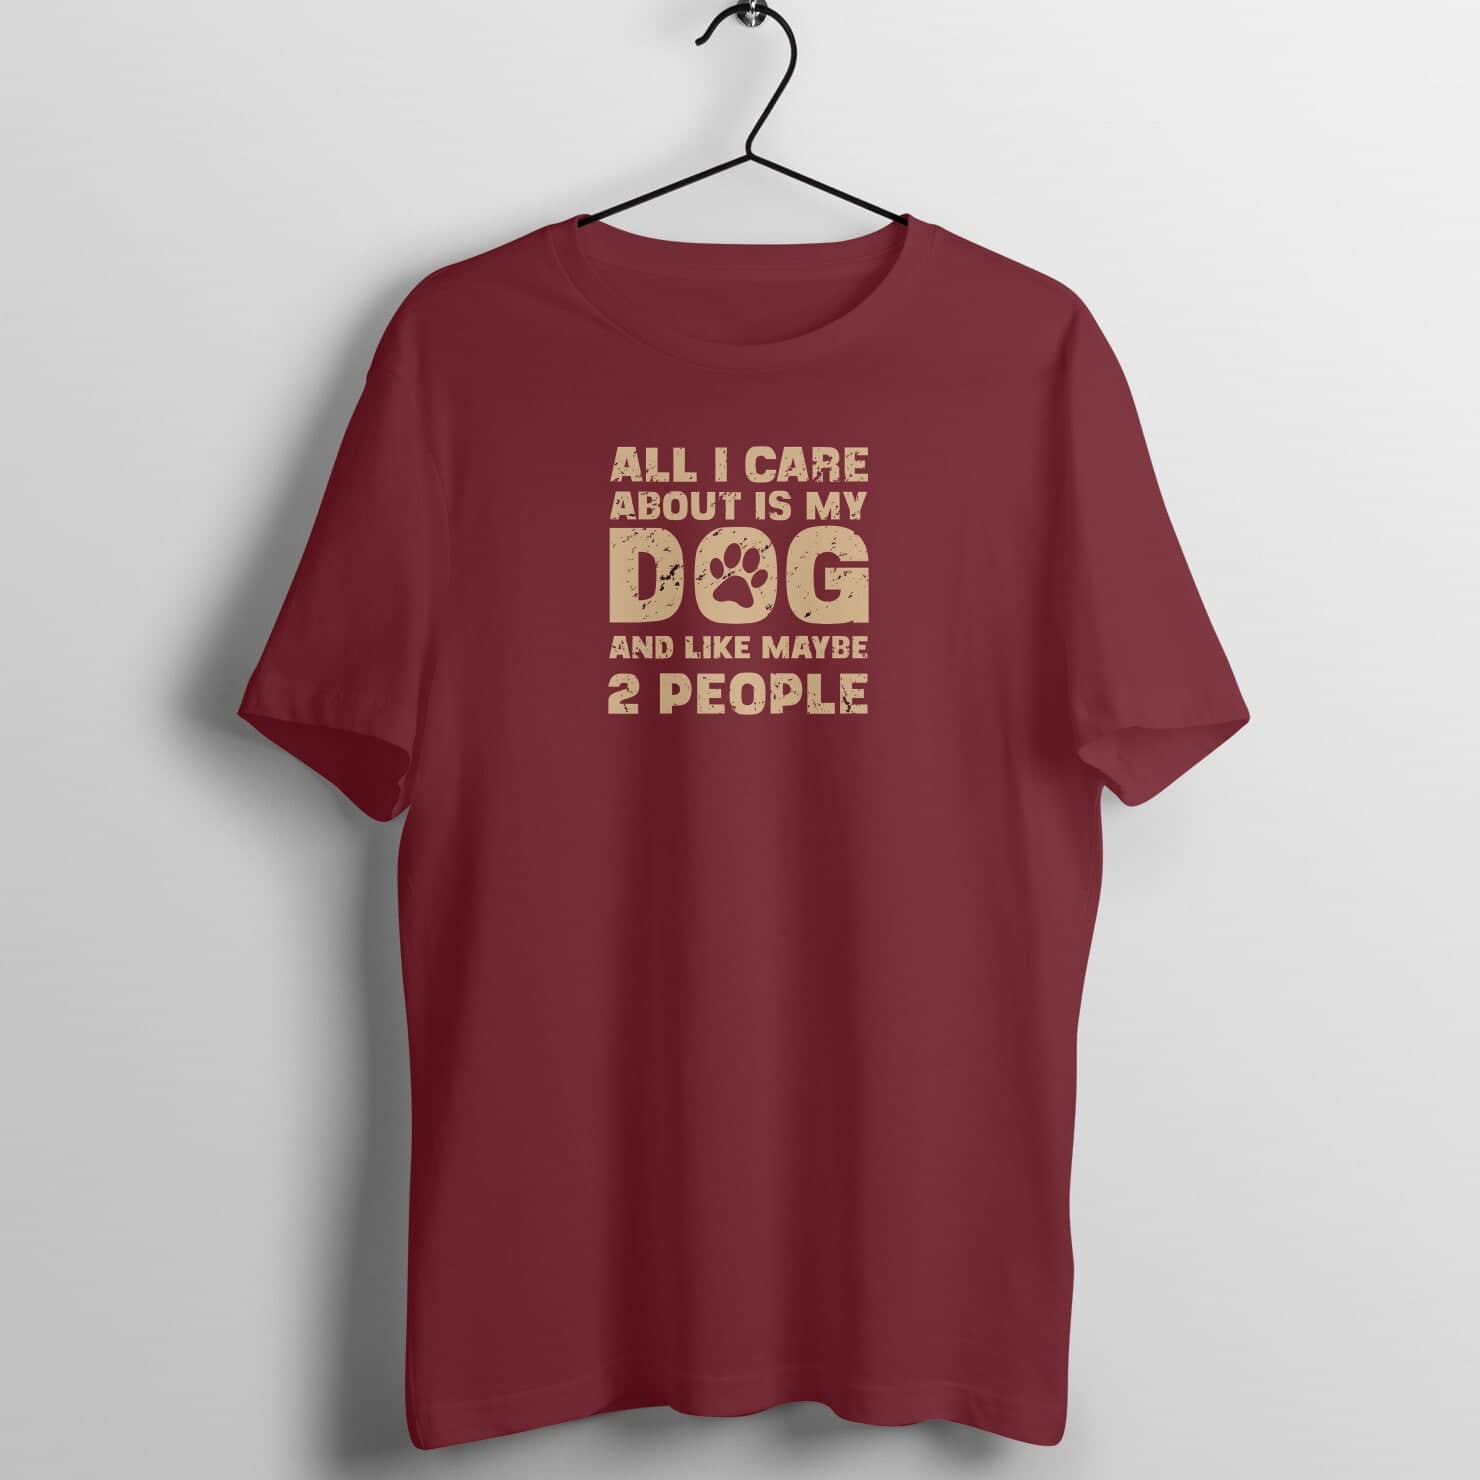 All I Care About is My Dog and Maybe 2 People Exclusive Maroon T Shirt for Men and Women Printrove Maroon S 